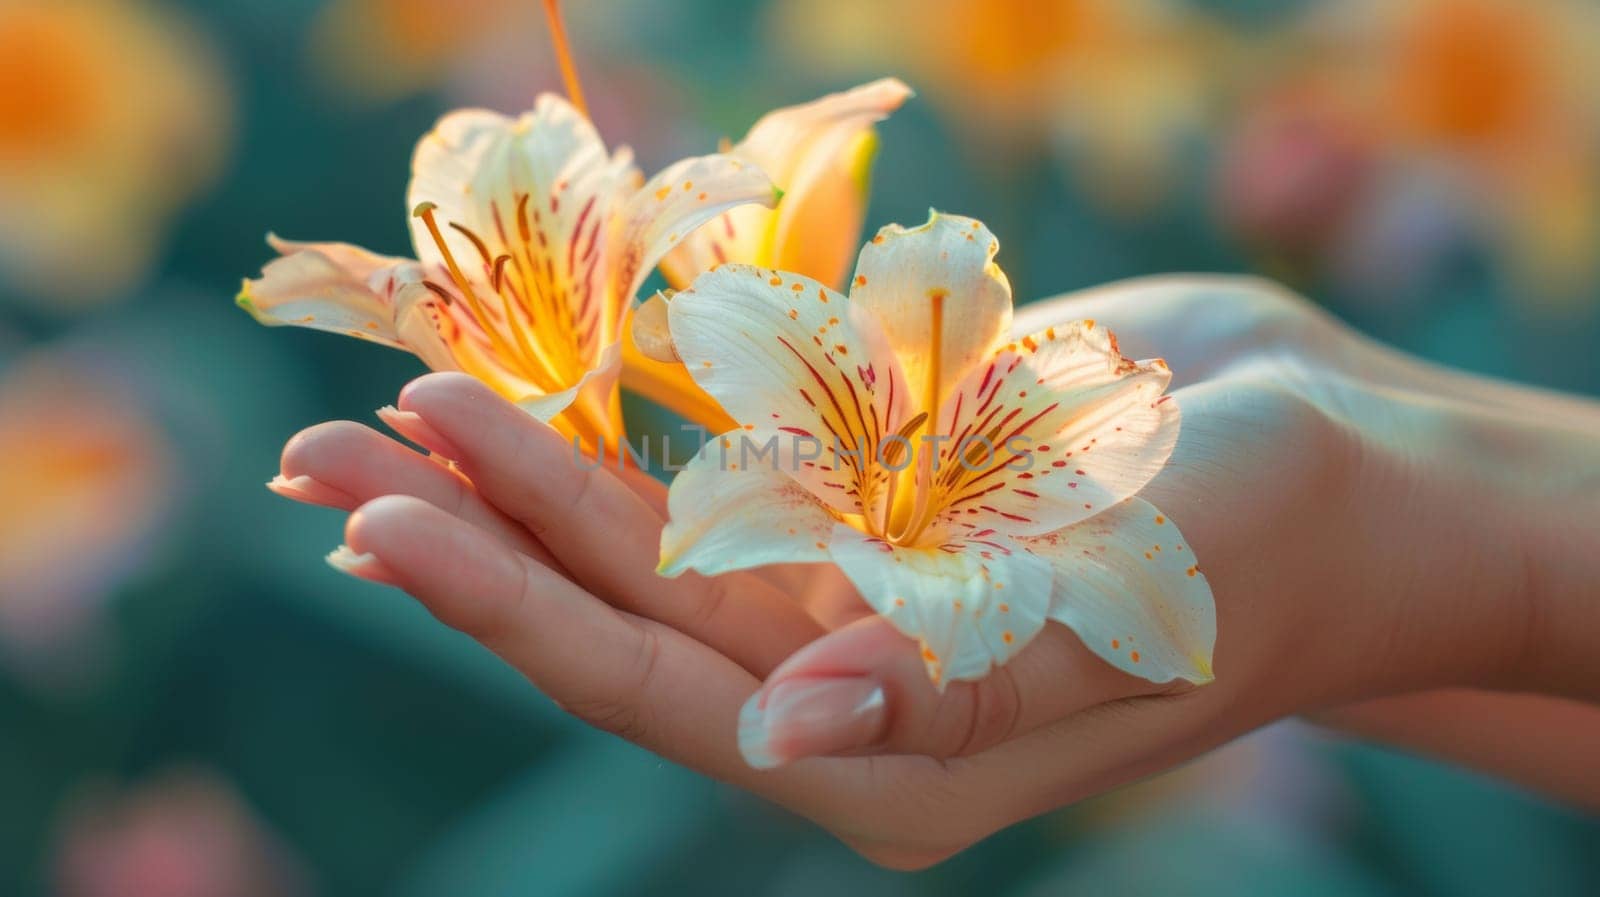 A person holding a flower in their hand with some blurry background